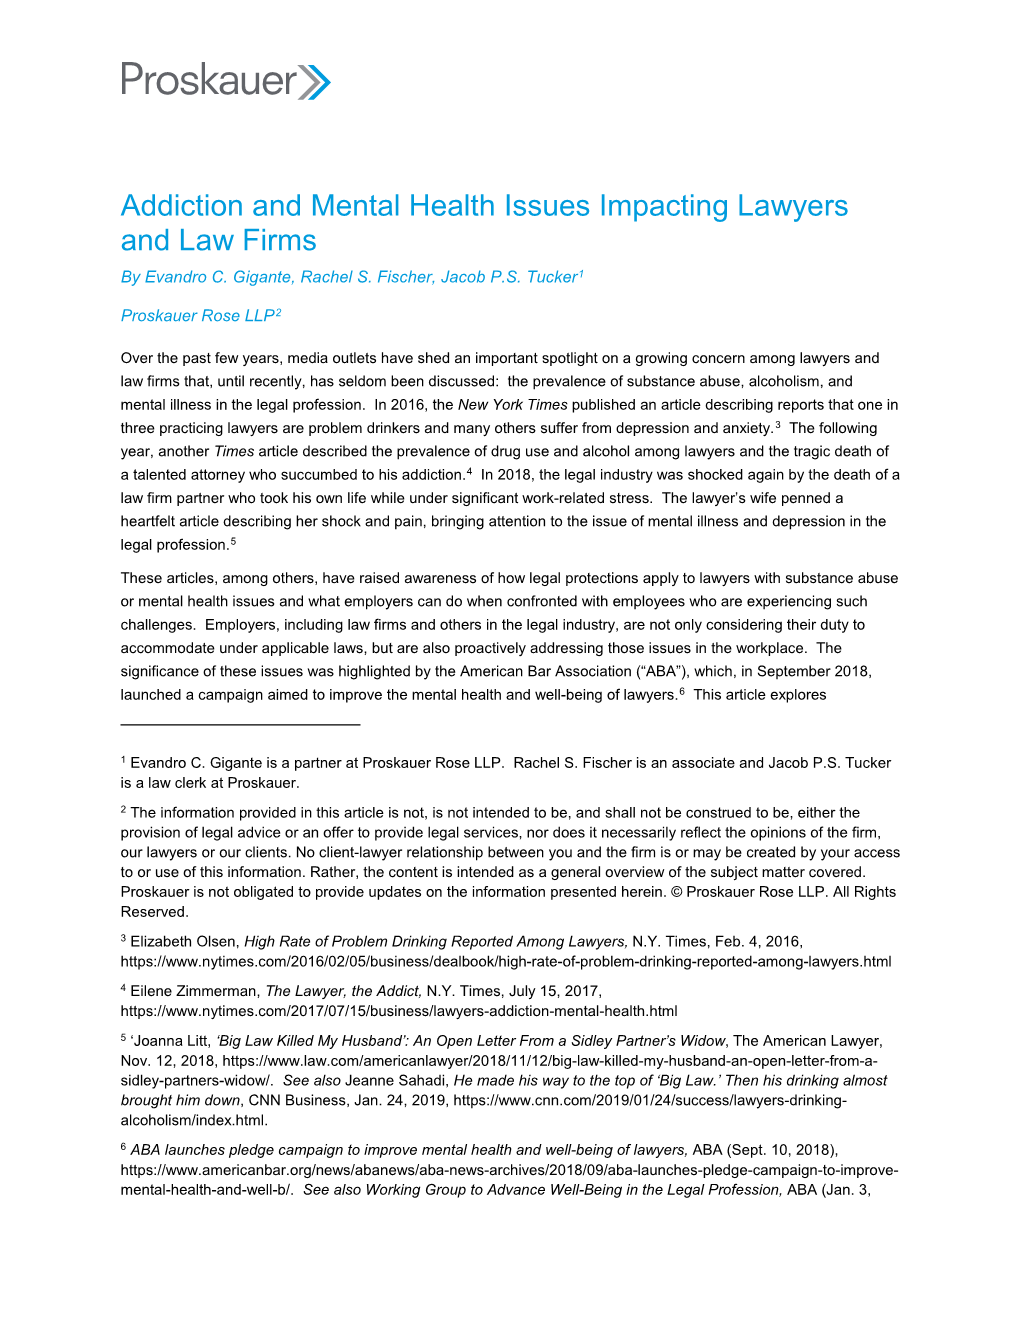 Addiction and Mental Health Issues Impacting Lawyers and Law Firms by Evandro C